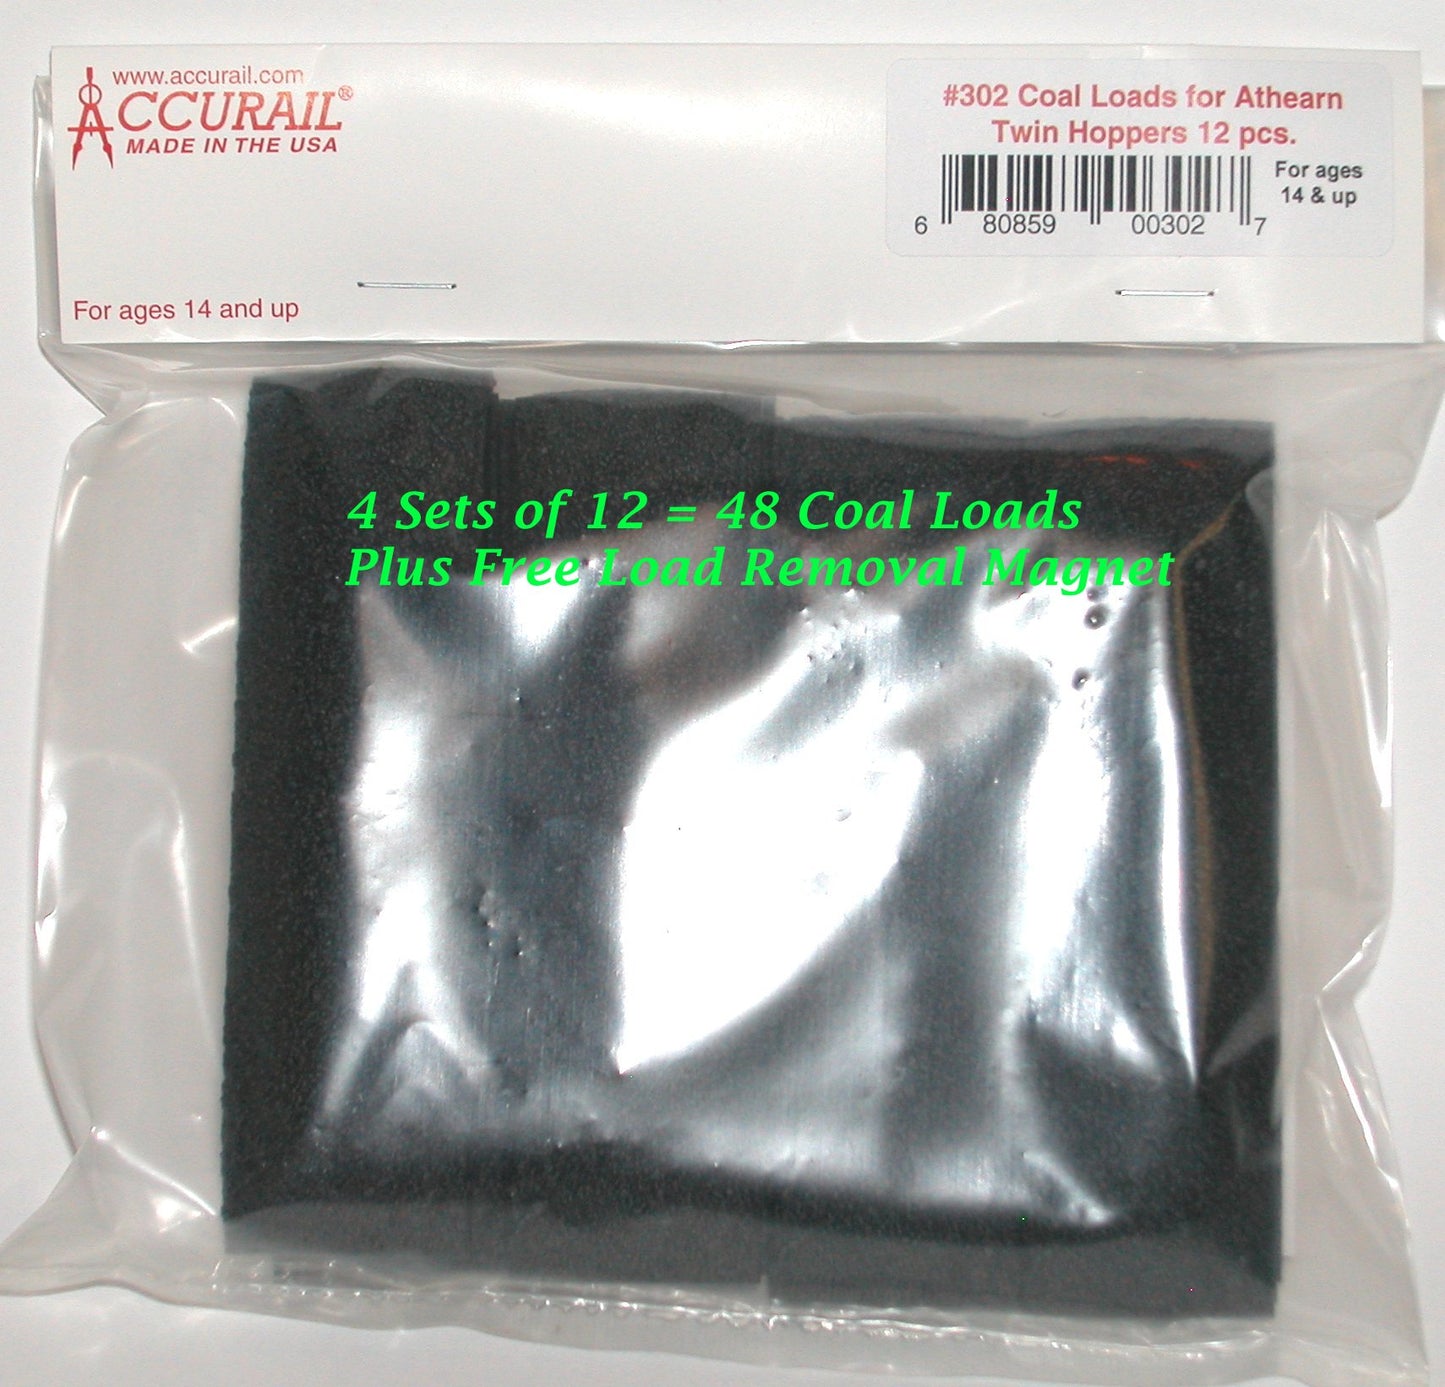 352 Coal Load for Athearn Twin Hoppers (48) with Magnet